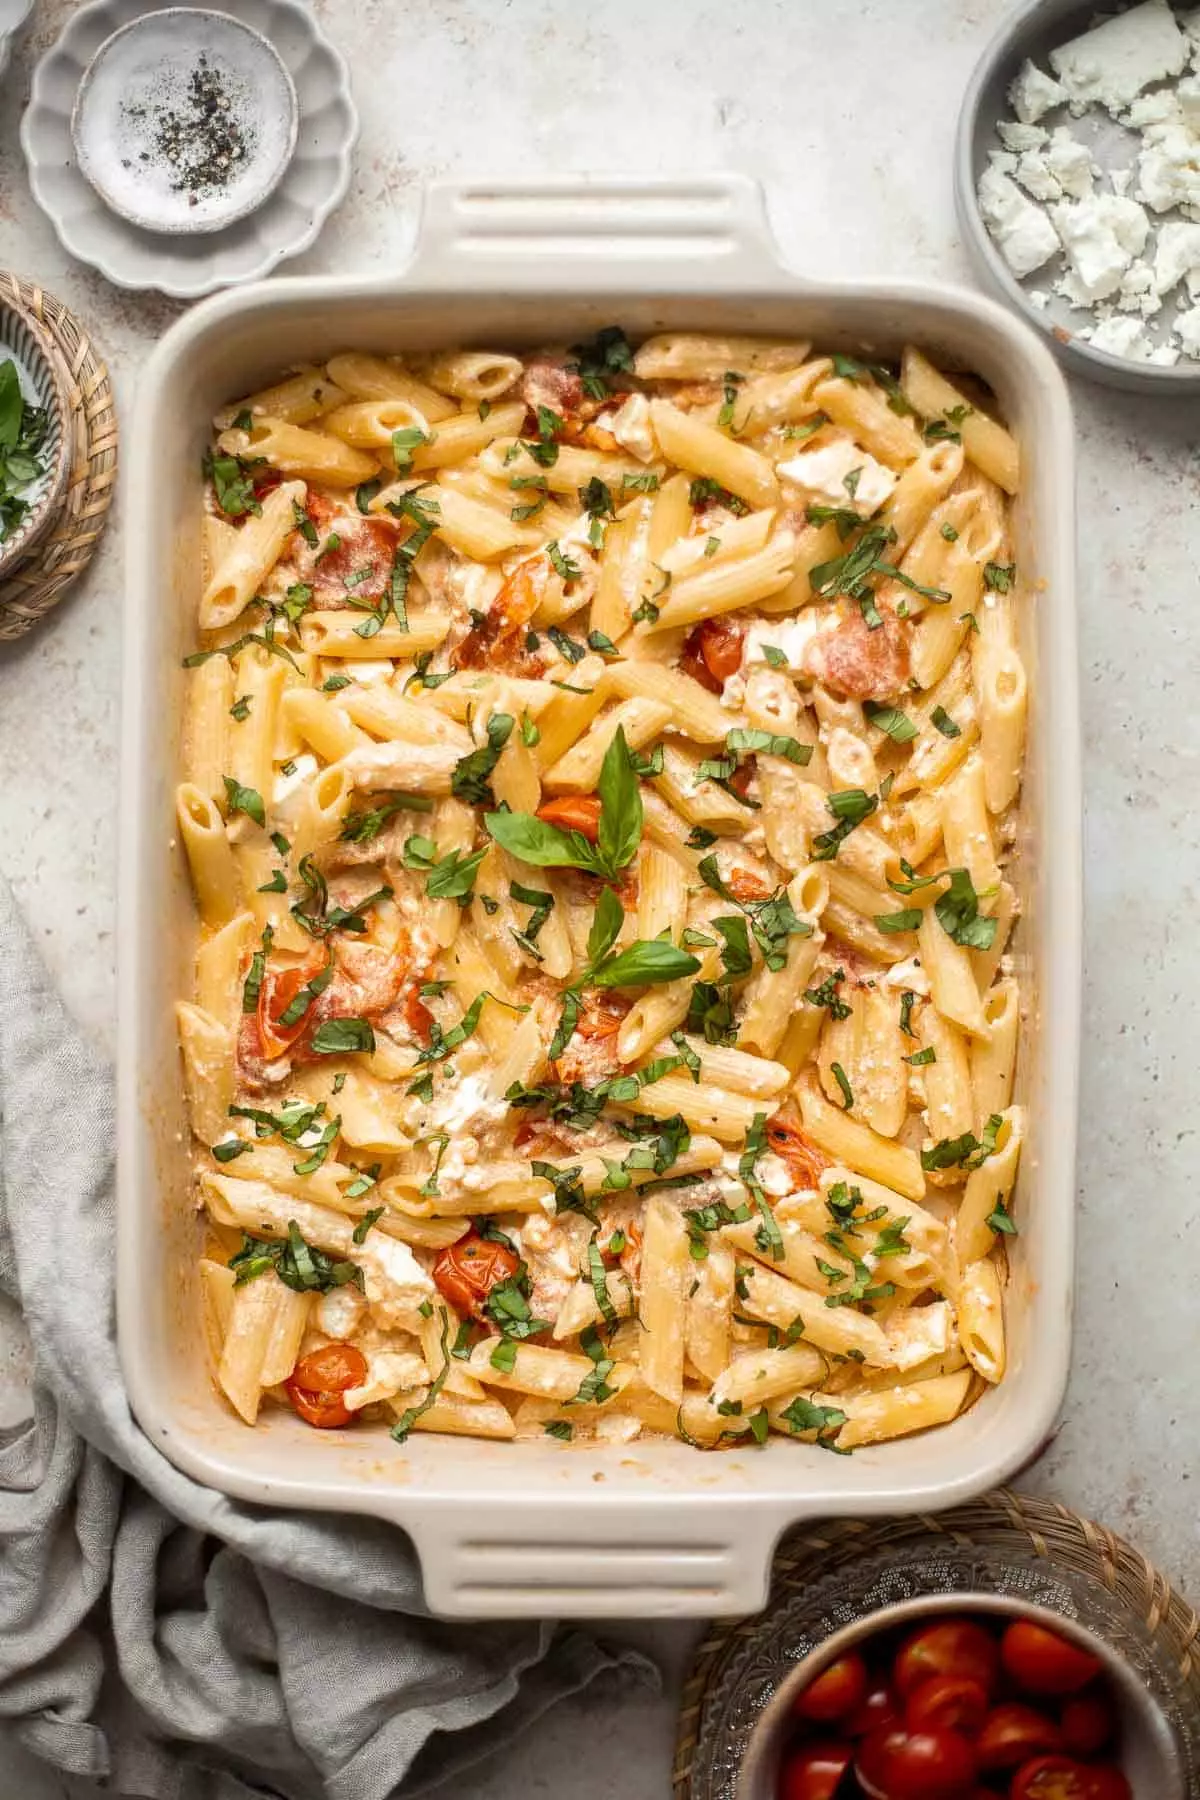 Baked Feta Pasta is a quick and easy weeknight dinner recipe that is creamy, delicious, and flavorful. The whole family will love this TikTok pasta!